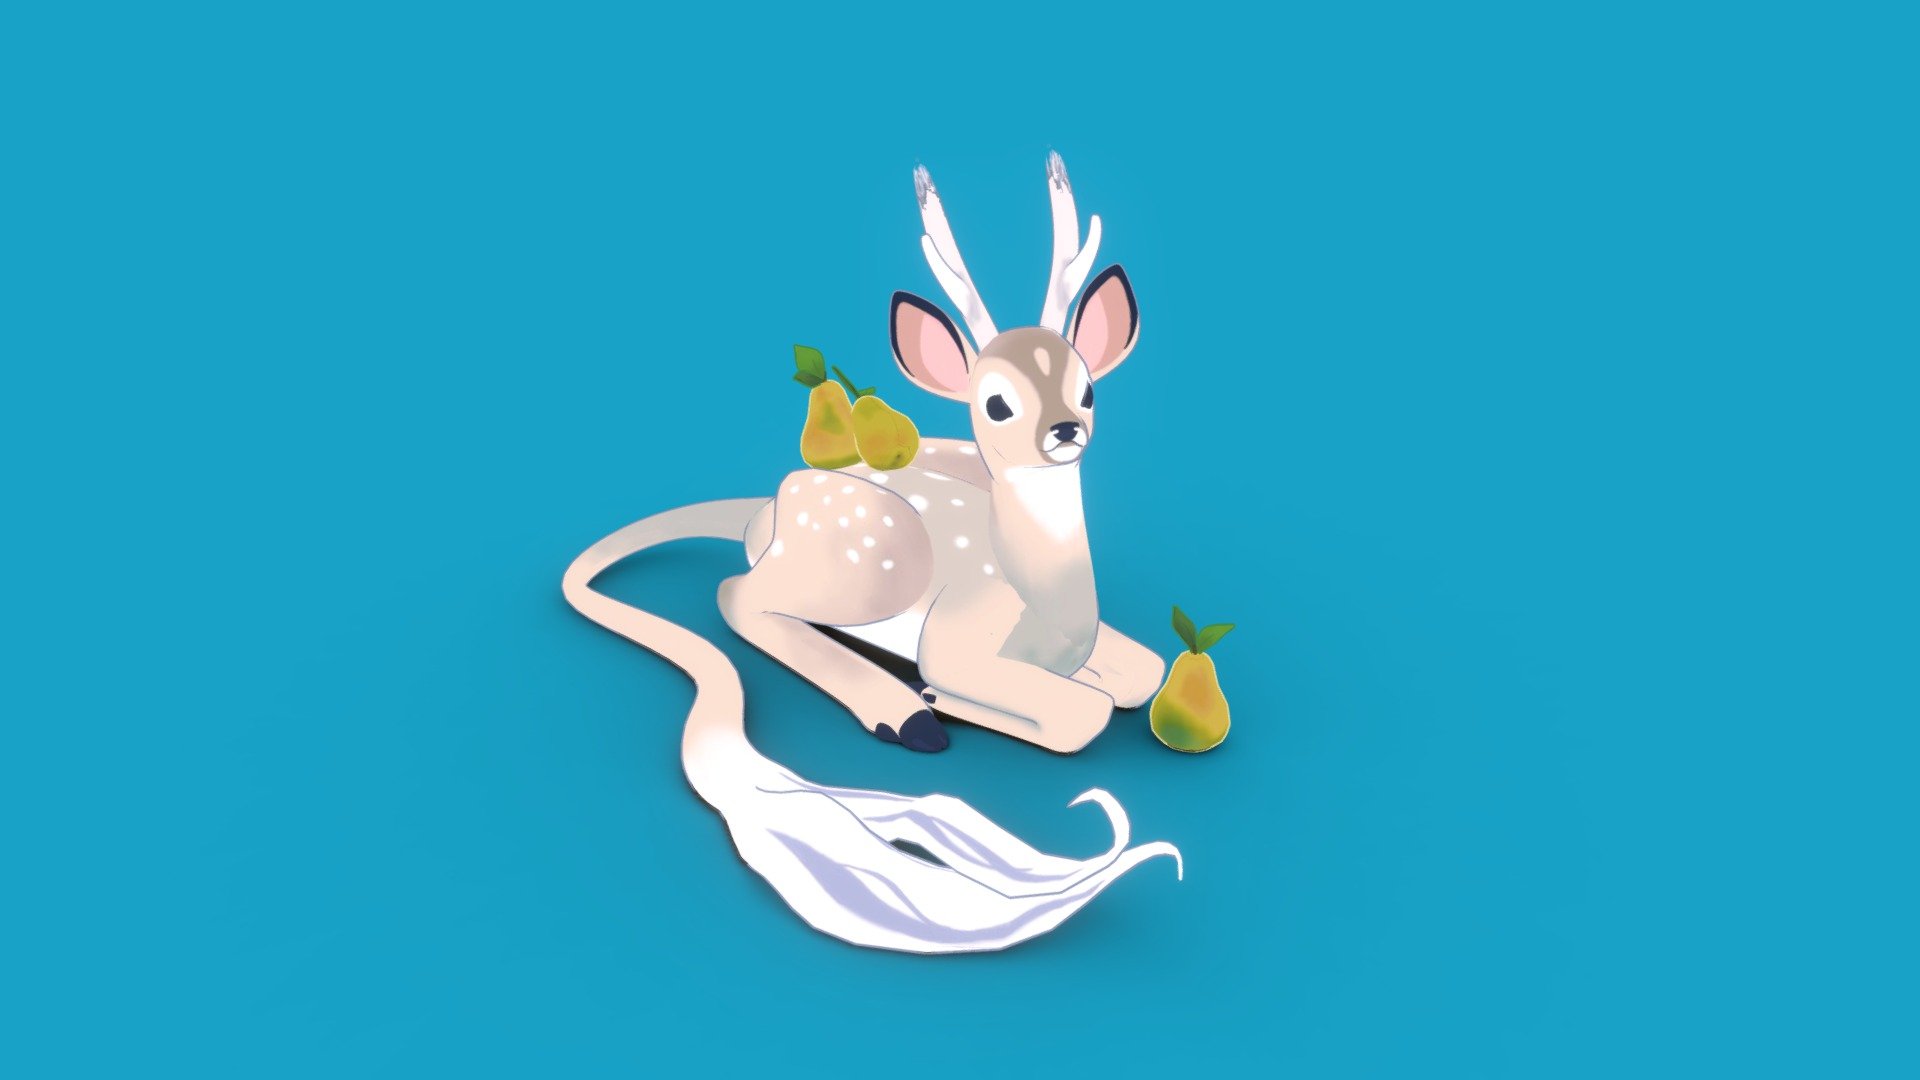 I immediately fell in love with this cute imaginary fawn, and thought I'd love to create this in 3D to kick start my 2022!

3D rendition of an illustration of a cute kirin-ish fawn by Heather Penn, check out her tumbler account for more works! 
 - kirin-ish fawn with pears - 3D model by Akiko.Tomiyoshi 3d model